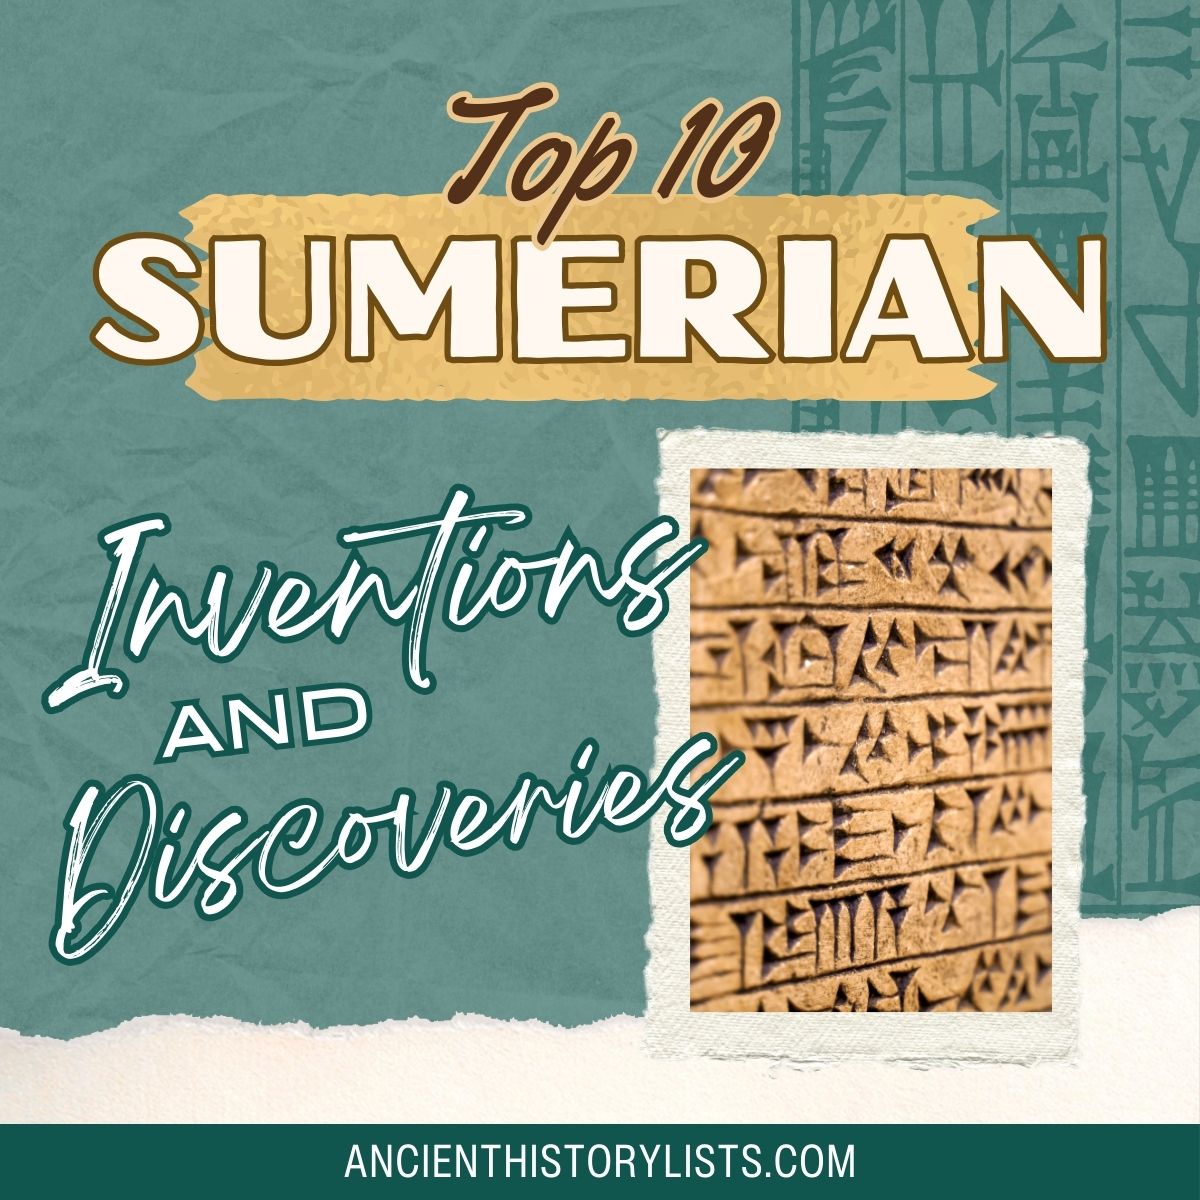 Sumerian Inventions and Discoveries